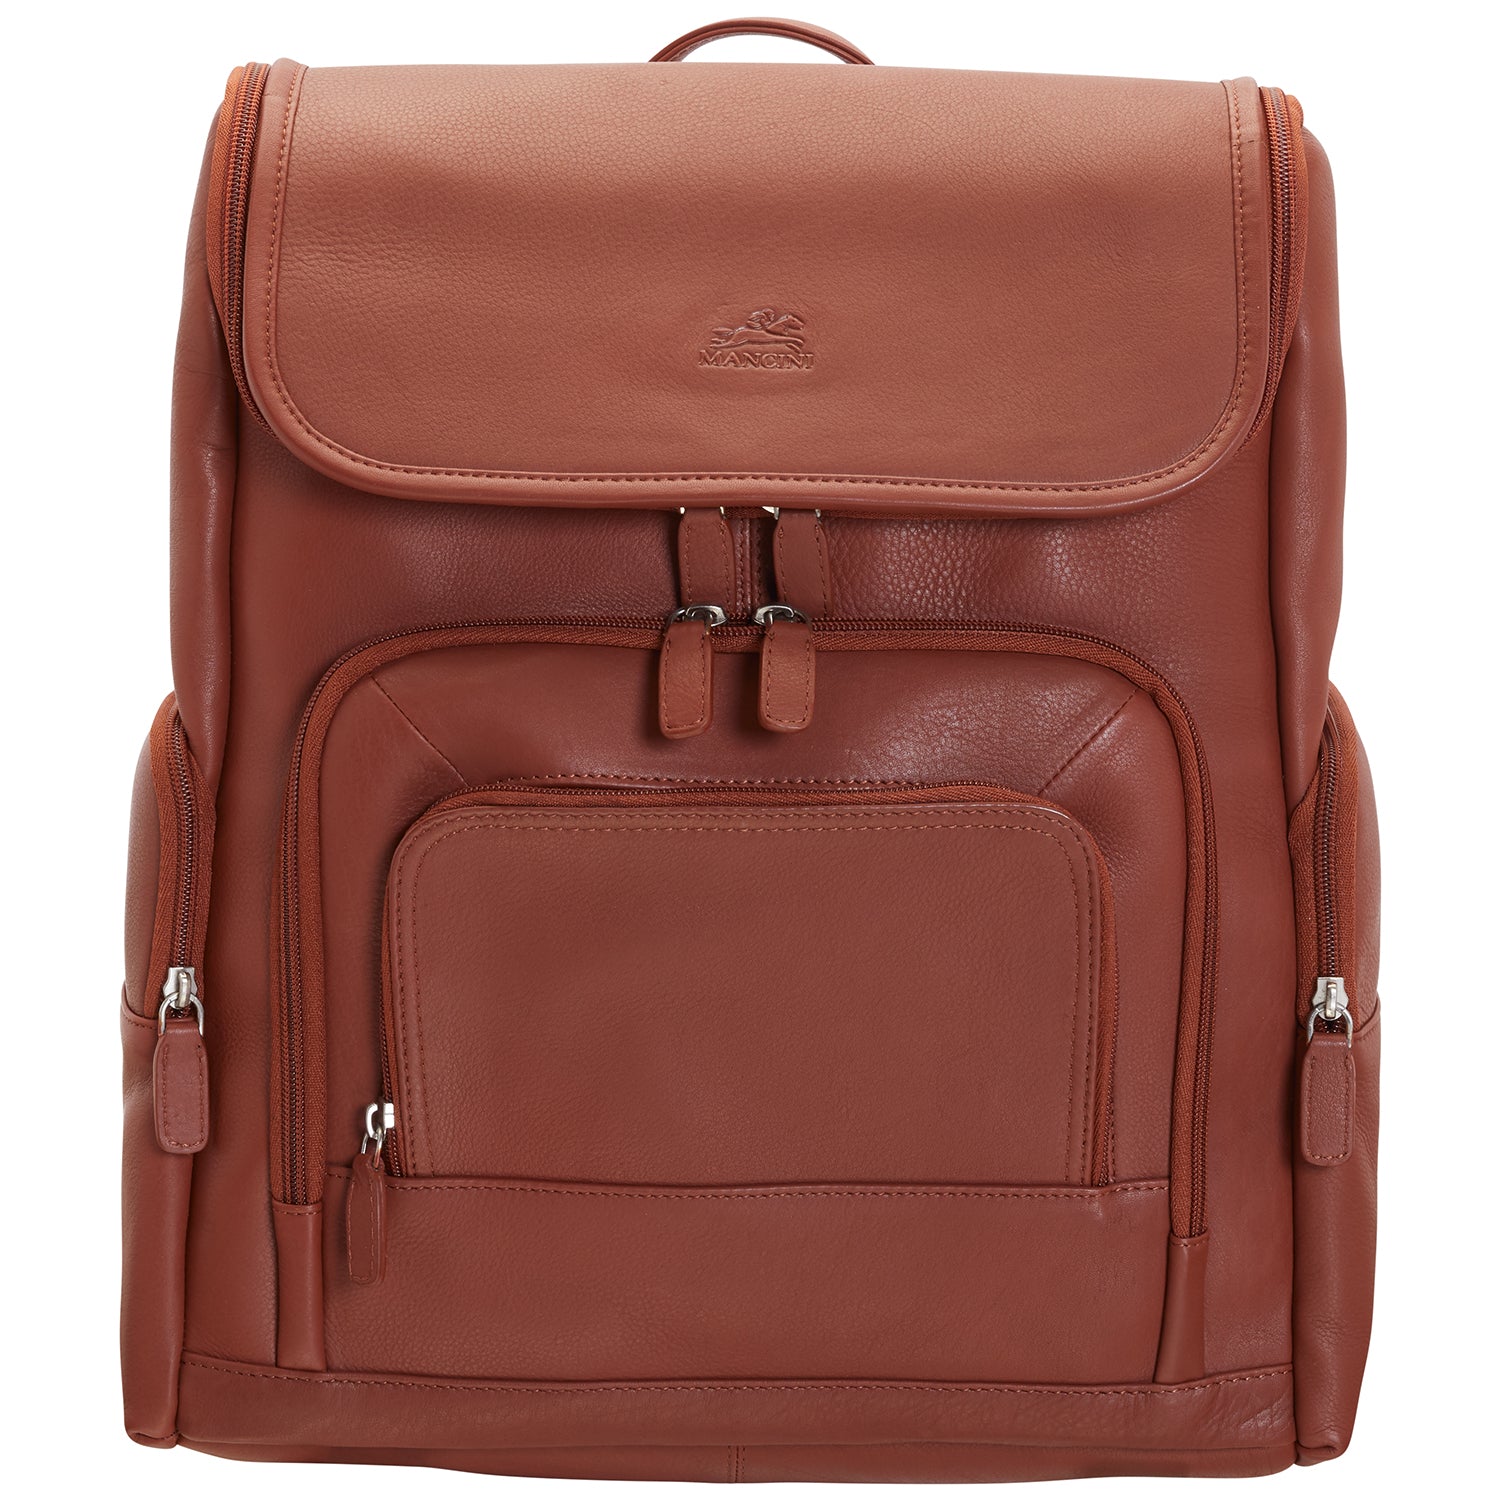 Mancini Leather Backpack with RFID Secure pocket for 15.6" Laptop and Tablet, 12" x 6" x 15", Cognac